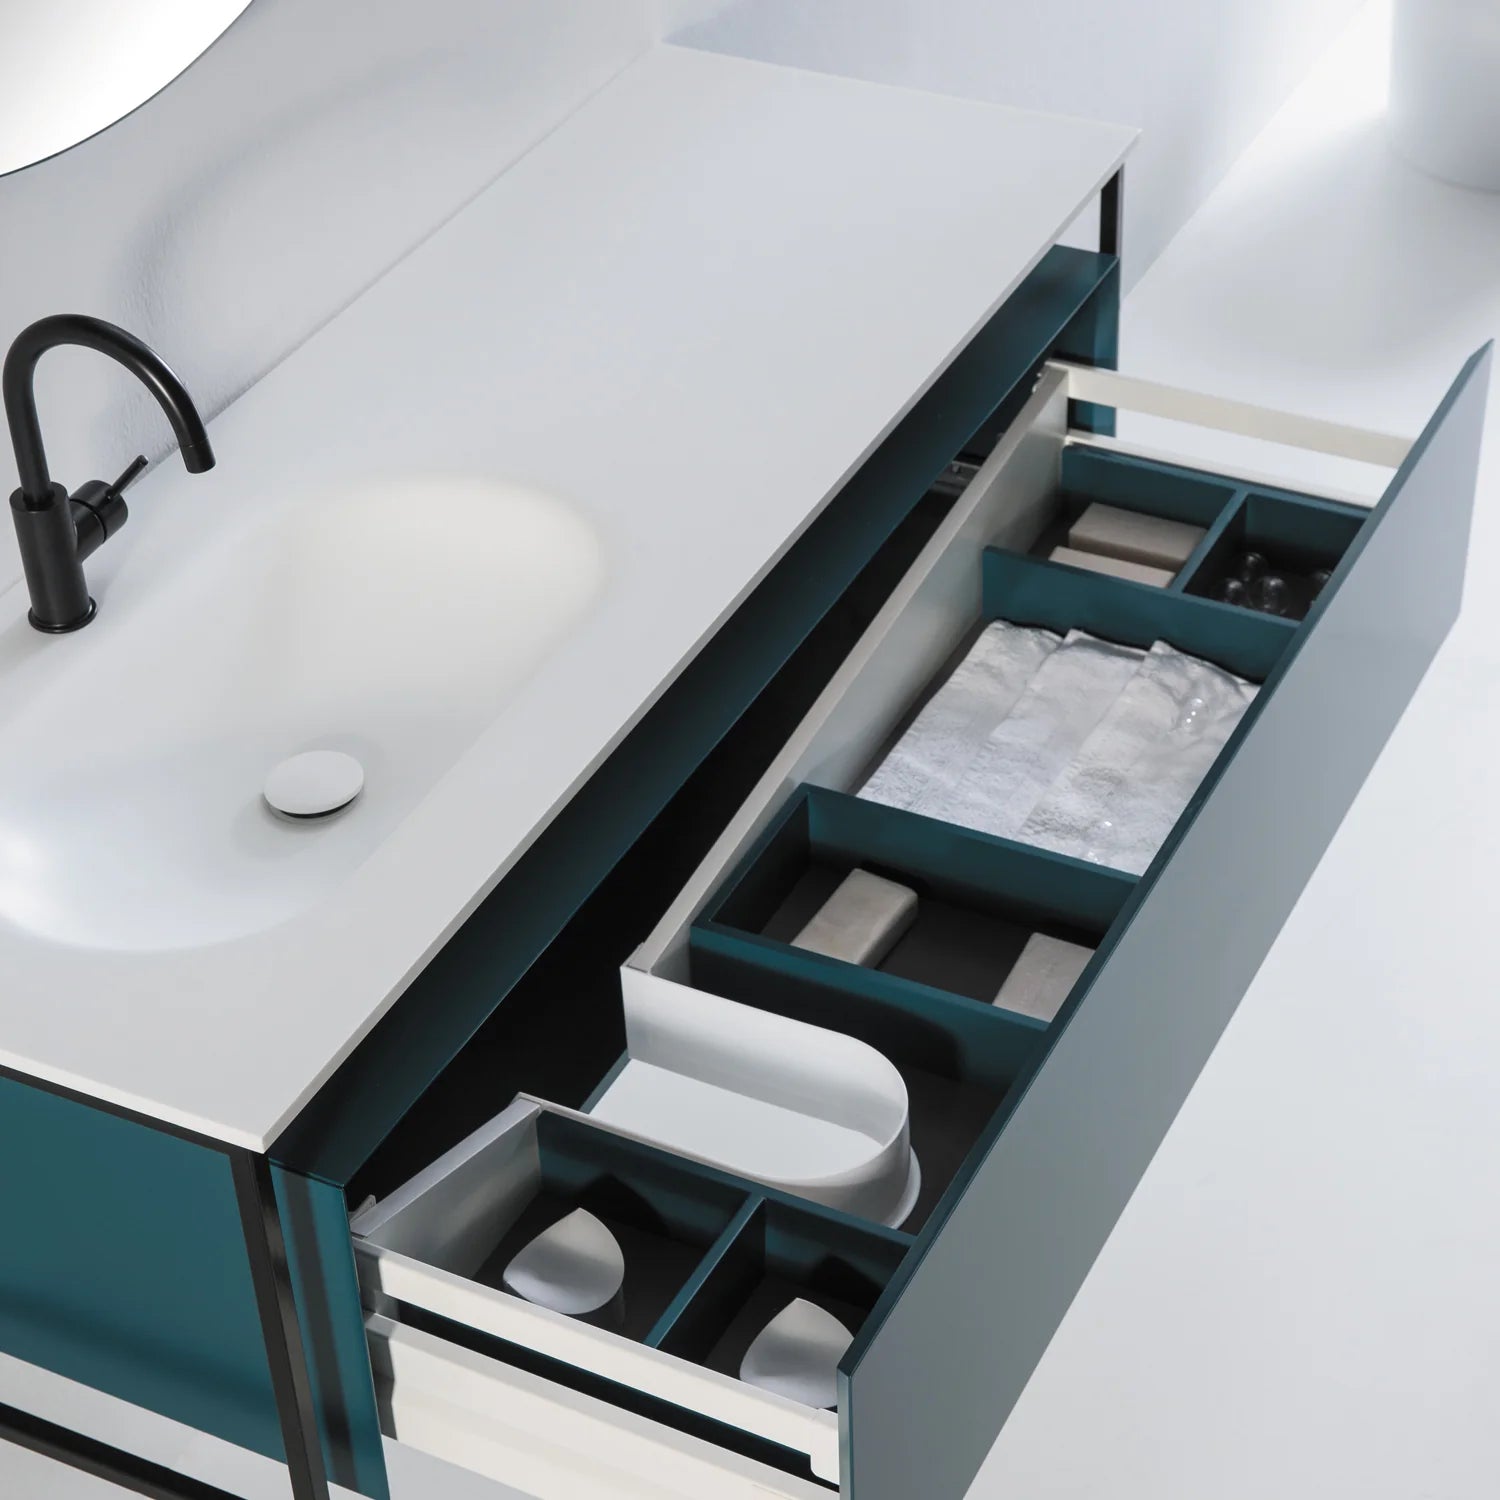 Eviva Modena 51 in. Wall Mounted Teal Bathroom Vanity with Integrated Solid Countertop